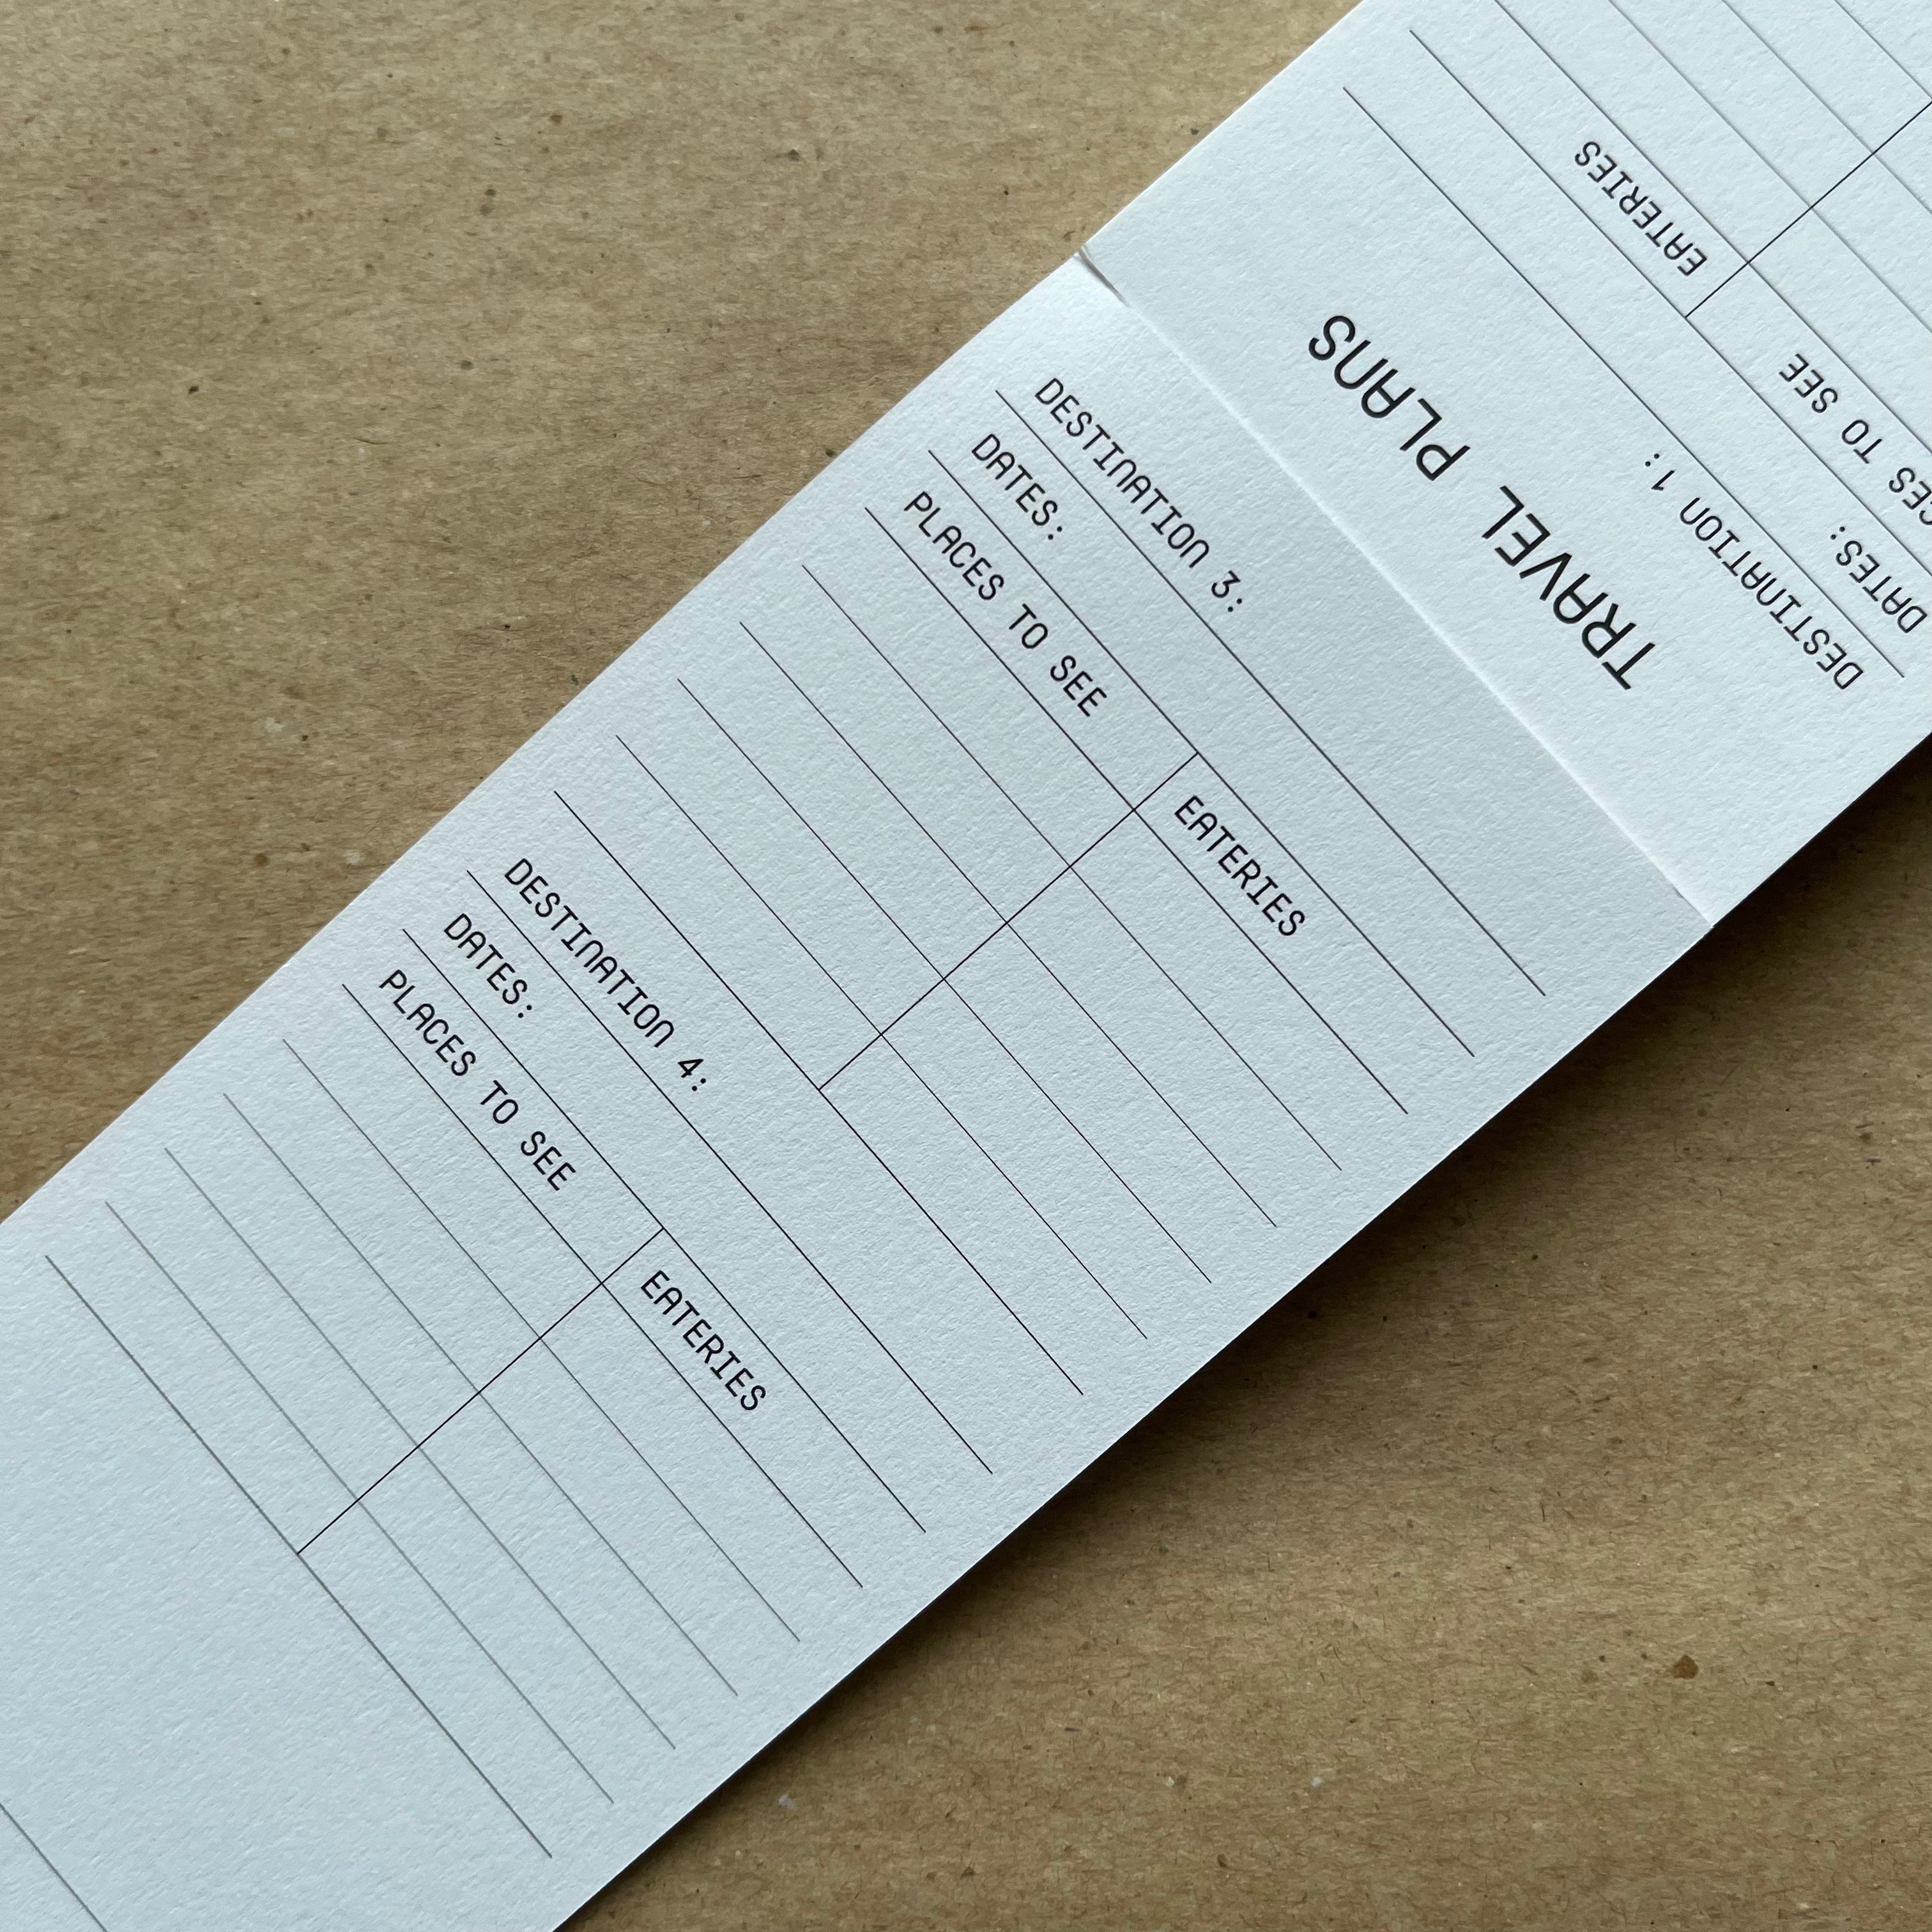 Travel Plans Notepad by OFFCUT